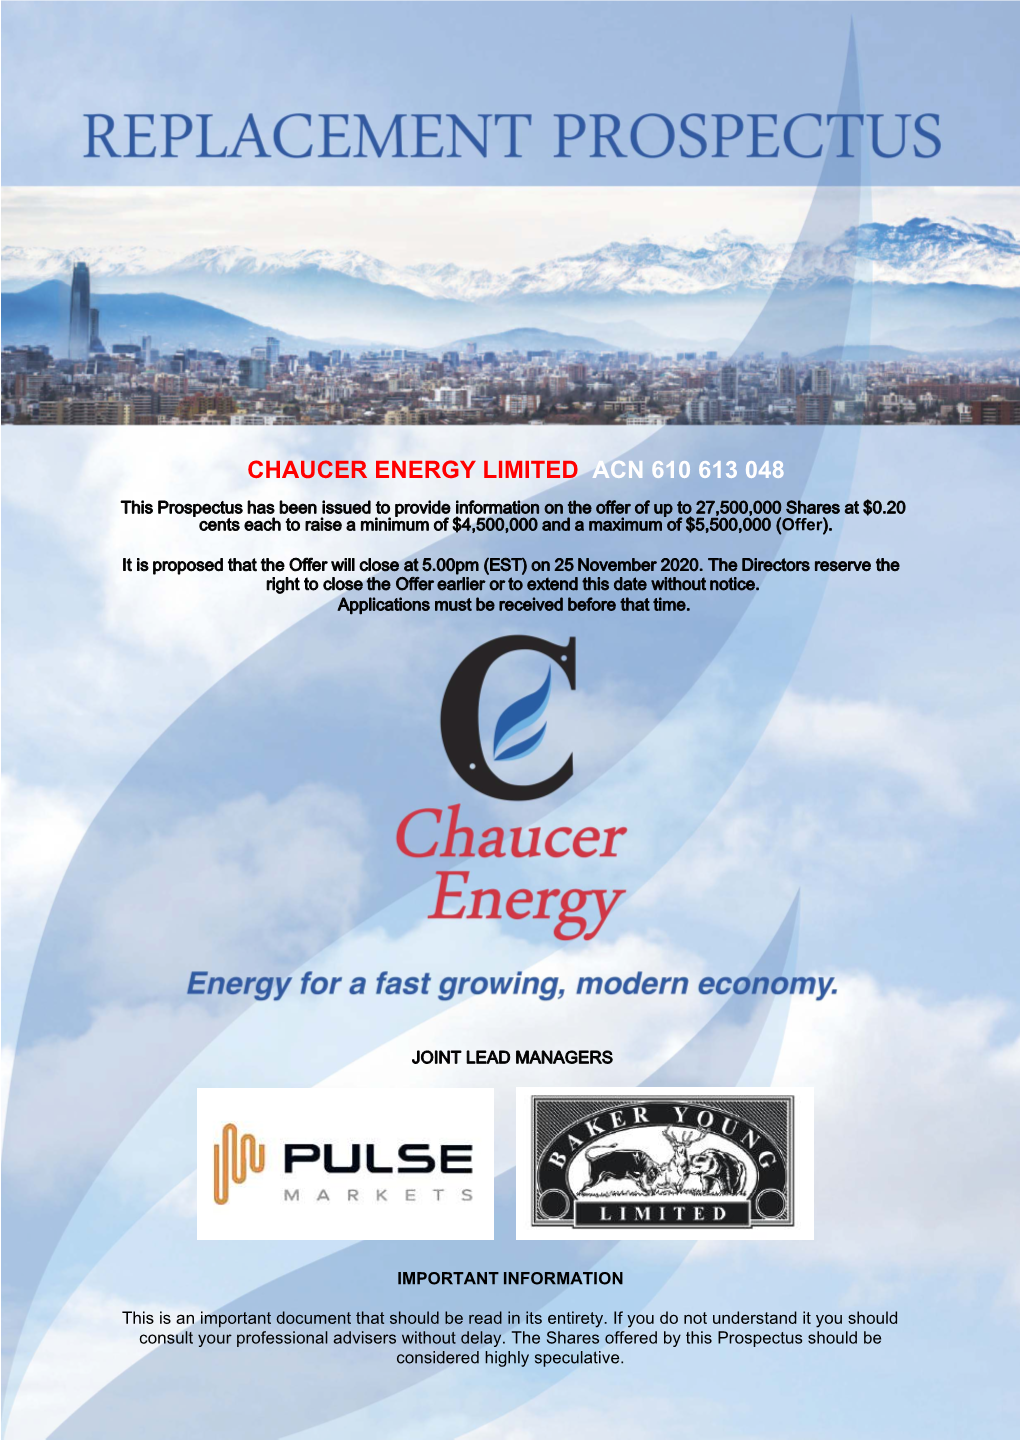 Chaucer Energy Limited